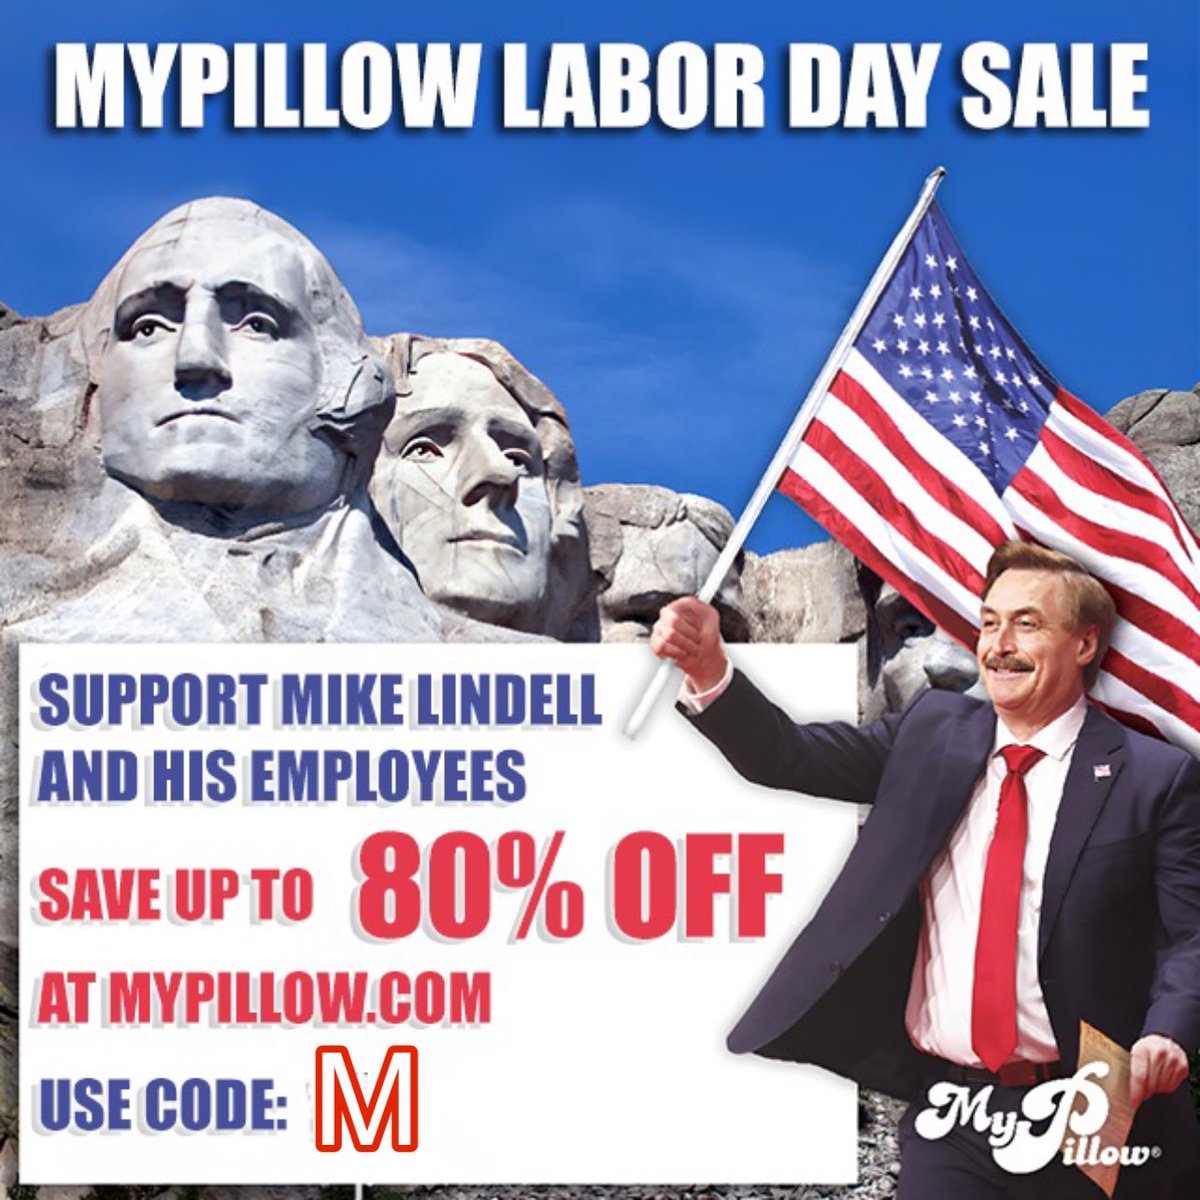 Save up to 80% off selected items using #MyPillow promo code 👉M👈 during our #MyPillowLabourDaySale. Visit 
mypillow.com/promocodem(enter promo code 👉M👈 at top of page)
#MyPillowPromoCodeM
#backtoschoolshopping #backtoschool
#backtoschoolsale ##MyPillowale